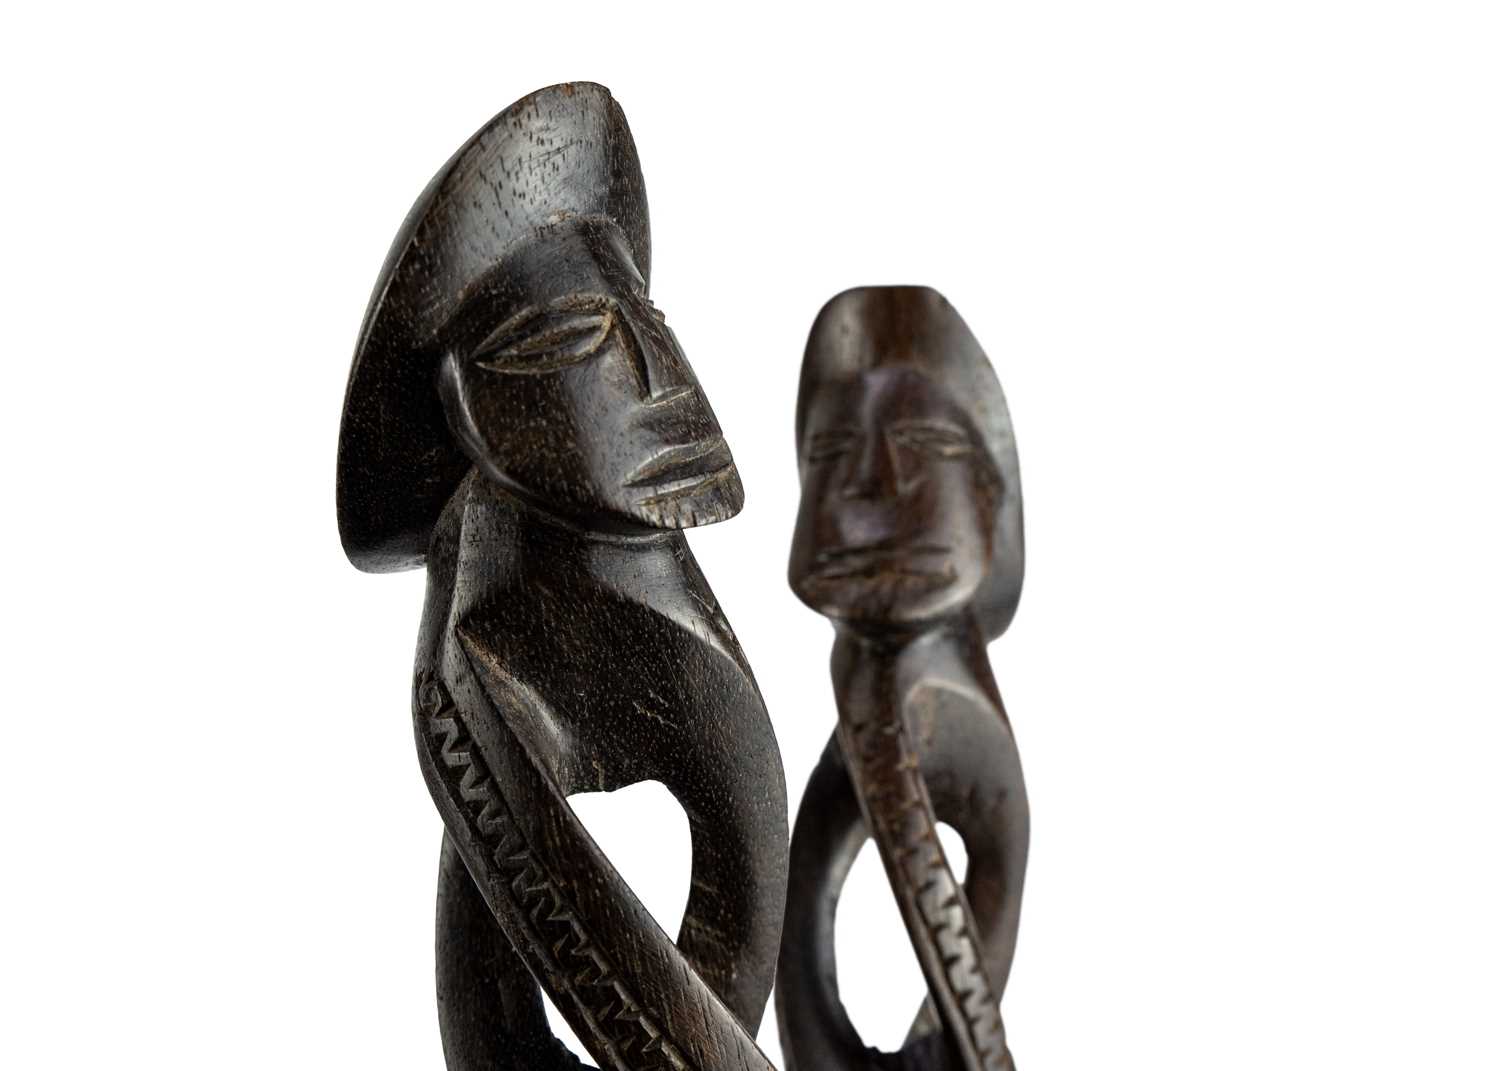 A pair of Fijian cannibal forks. - Image 3 of 3